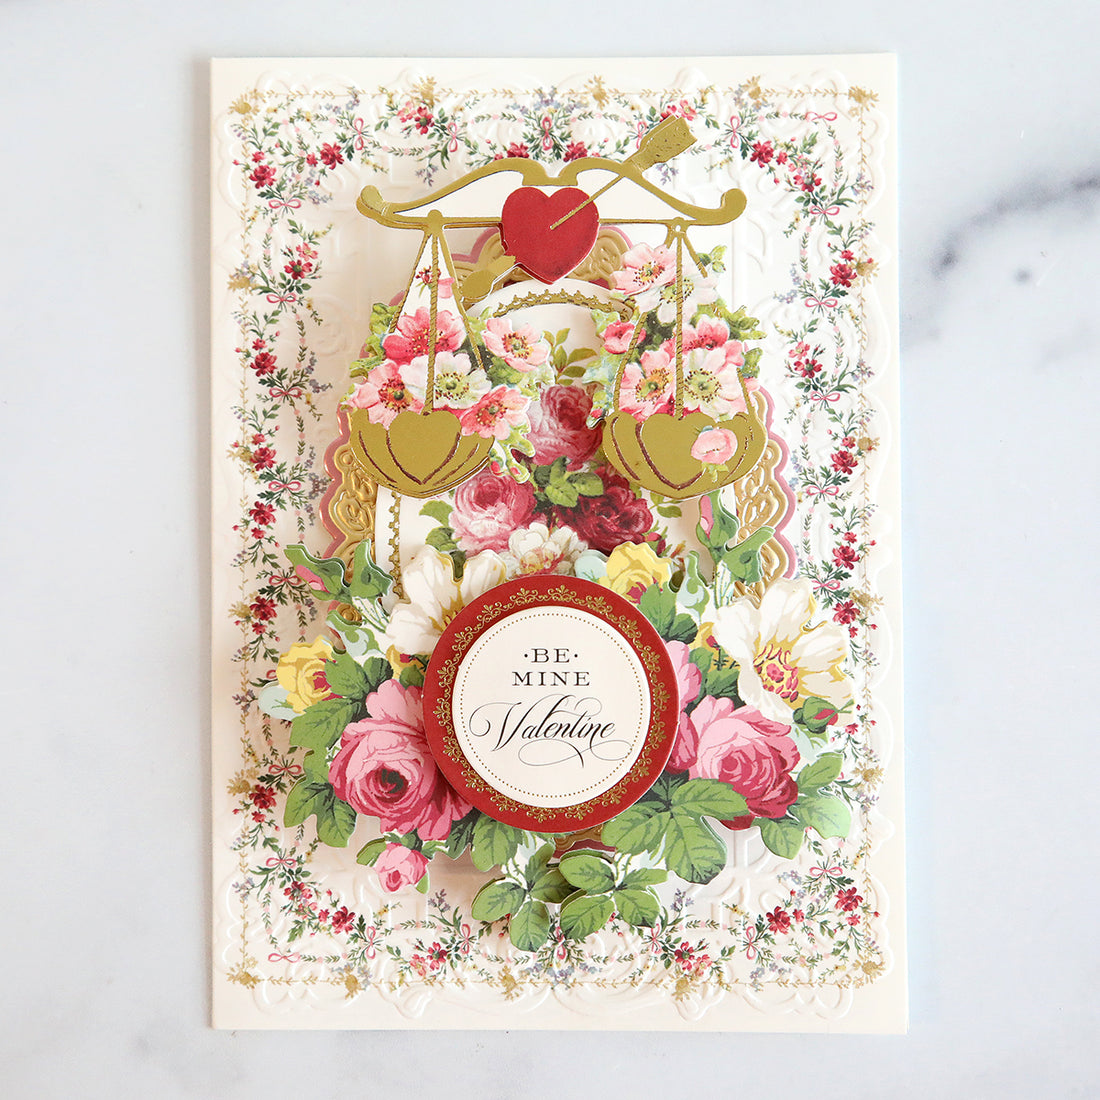 Intricate valentine that is embossed and made up of valentine ephemera